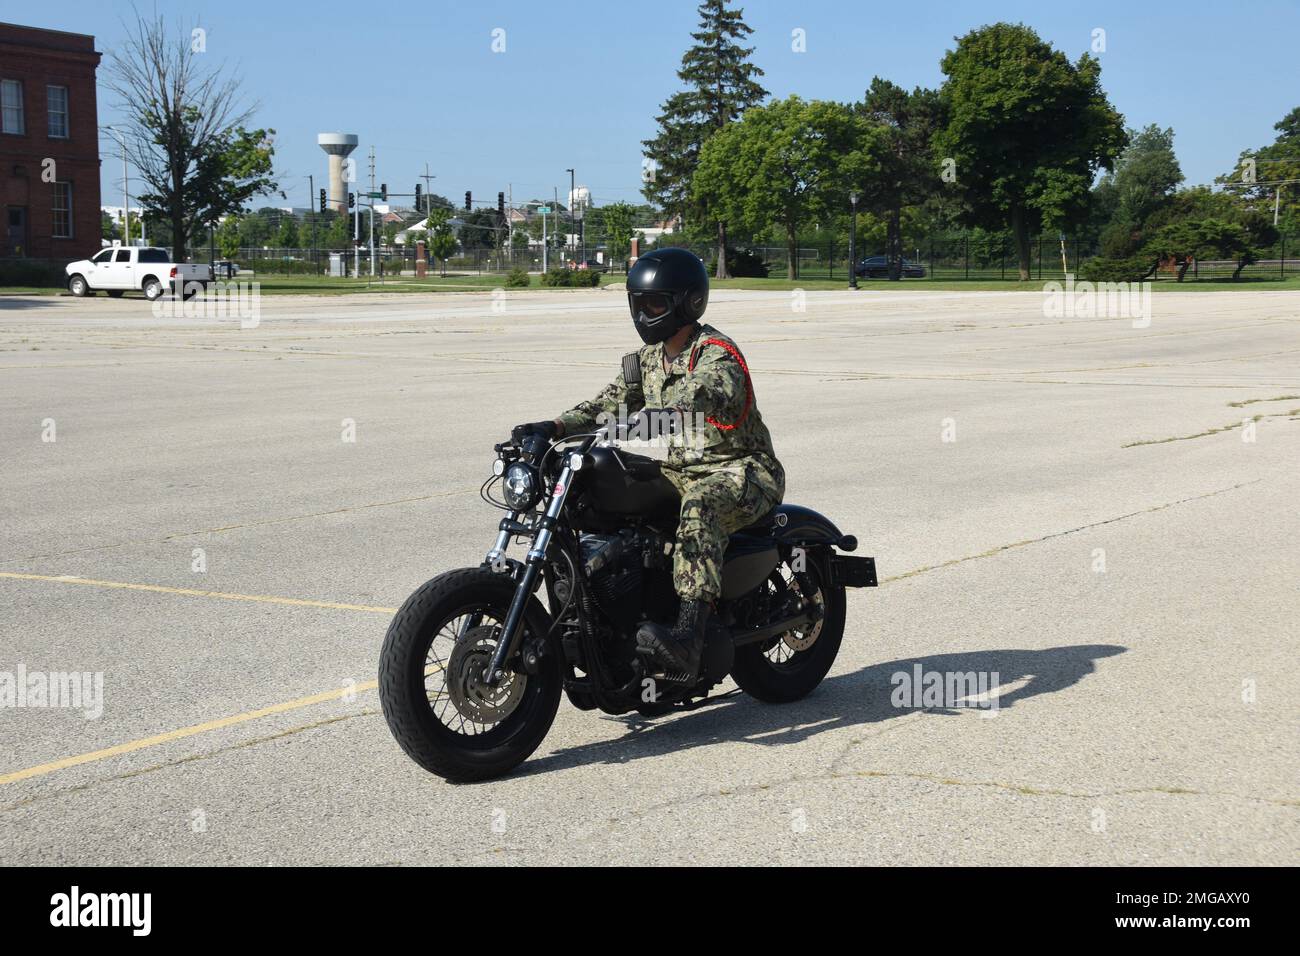 GREAT LAKES (Aug. 23, 2022) Chief Mineman Joshua Royer, a recruit division commander at the U.S. Navy's only boot camp, Recruit Training Command, participates in a motorcycle class in Camp Barry aboard Naval Station Great Lakes. Recruit Training Command and Naval Station Great Lakes Safety hosted American Motorcycle Training instructors to provide a total of five sessions of safety oriented rider training over three consecutive days August 22-24. Each session was three hours and accommodated up to 12 riders. Stock Photo